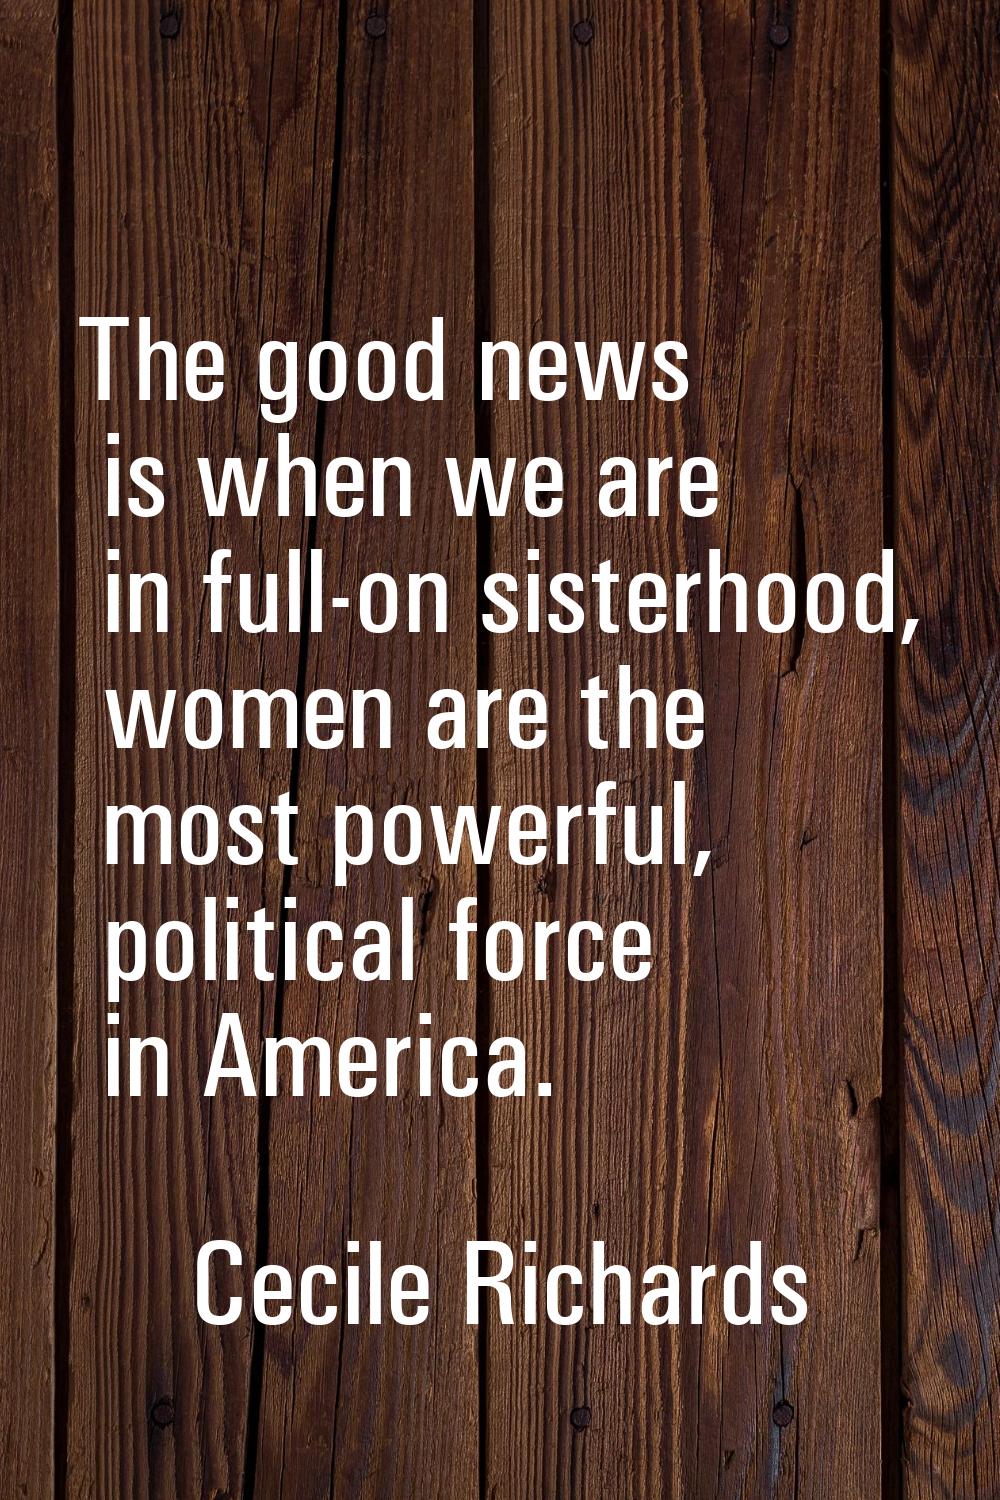 The good news is when we are in full-on sisterhood, women are the most powerful, political force in